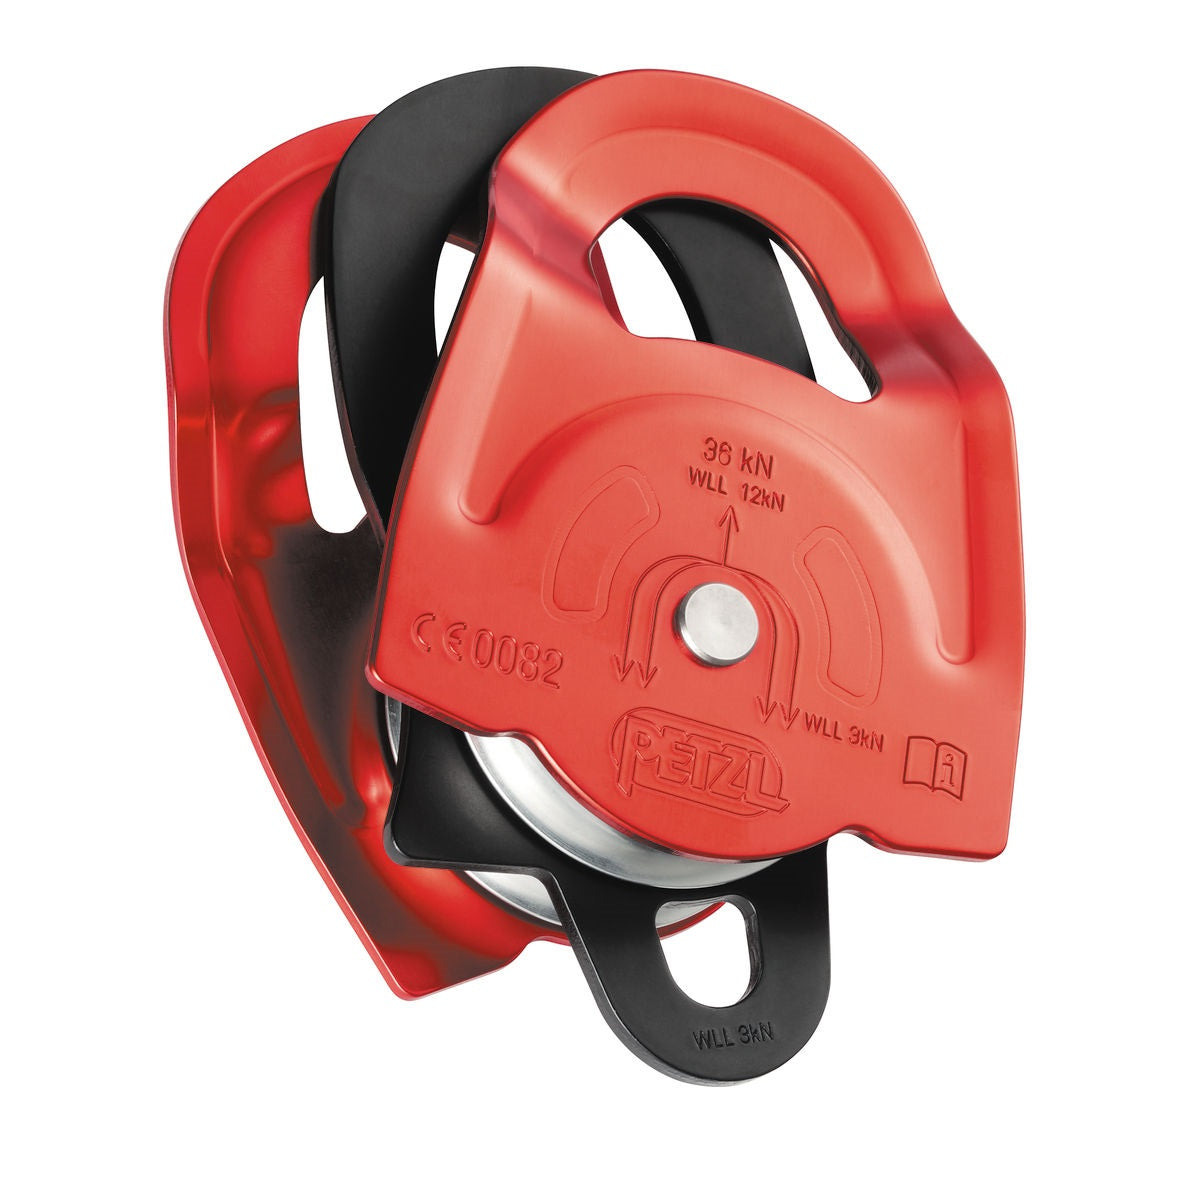 Petzl Twin Pulley